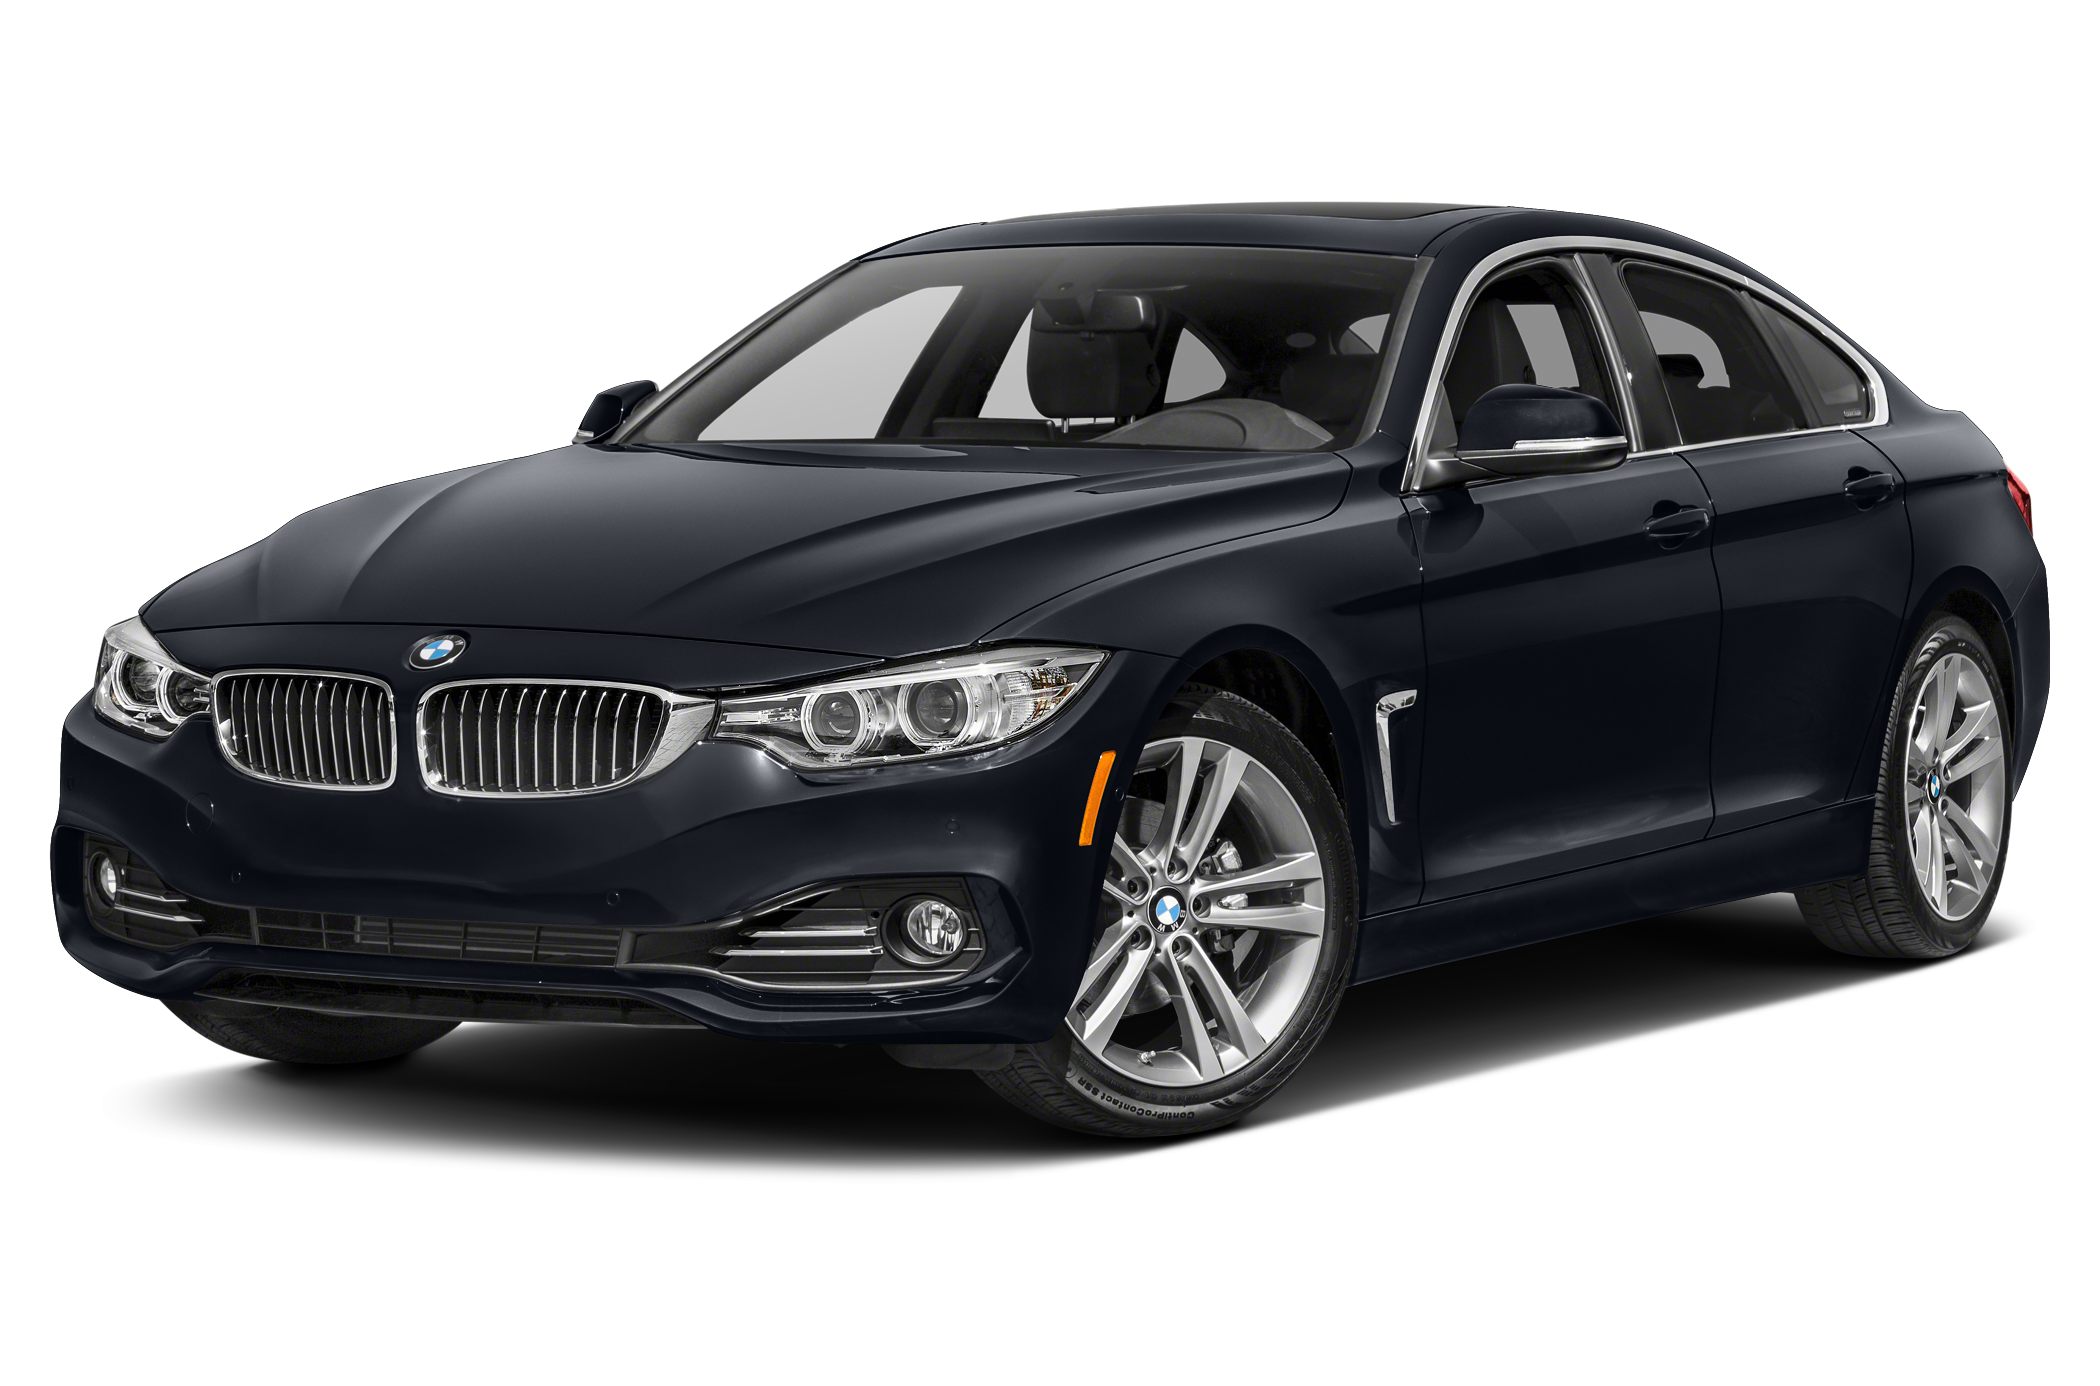  BMW 428I oem parts and accessories on sale